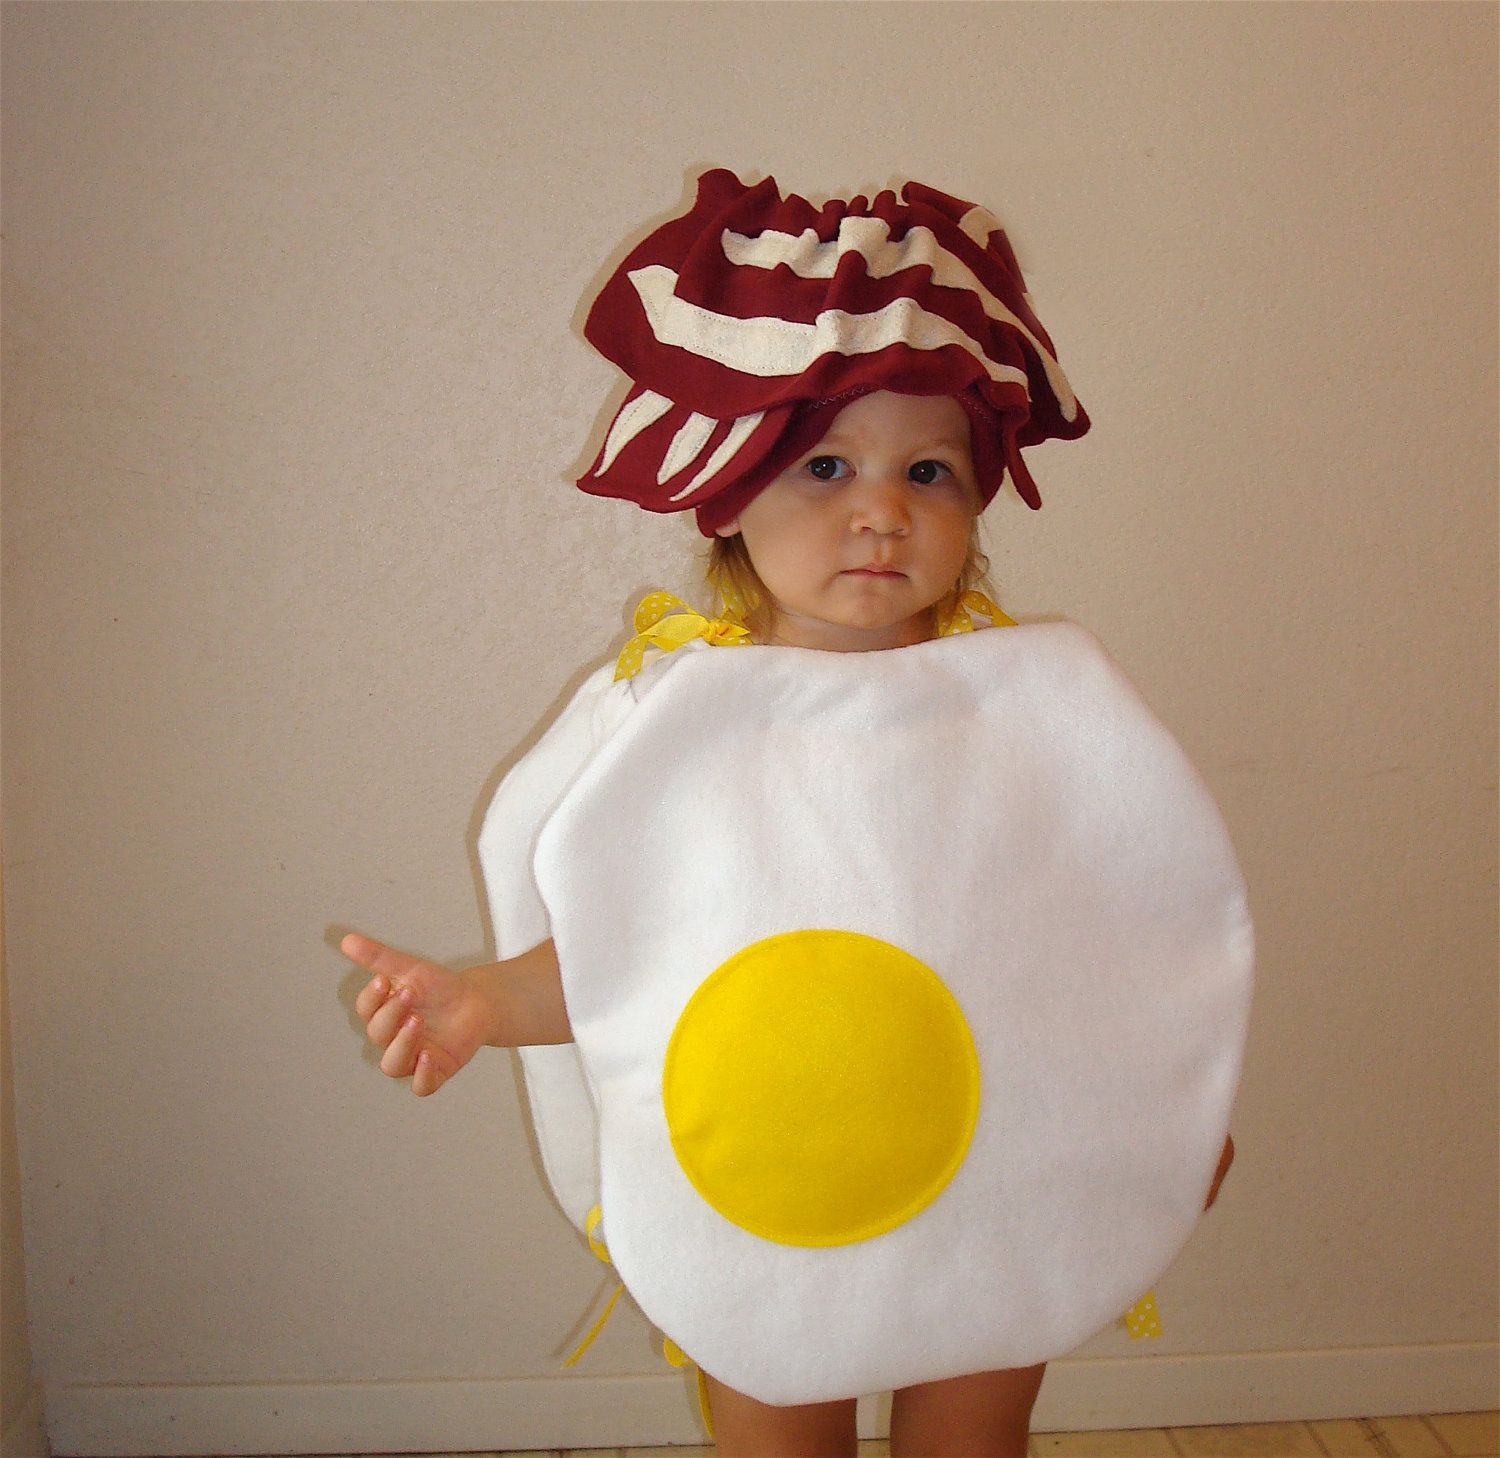 Creative Baby Halloween Costume Ideas
 Baby Costume Toddler Egg With Bacon coolness